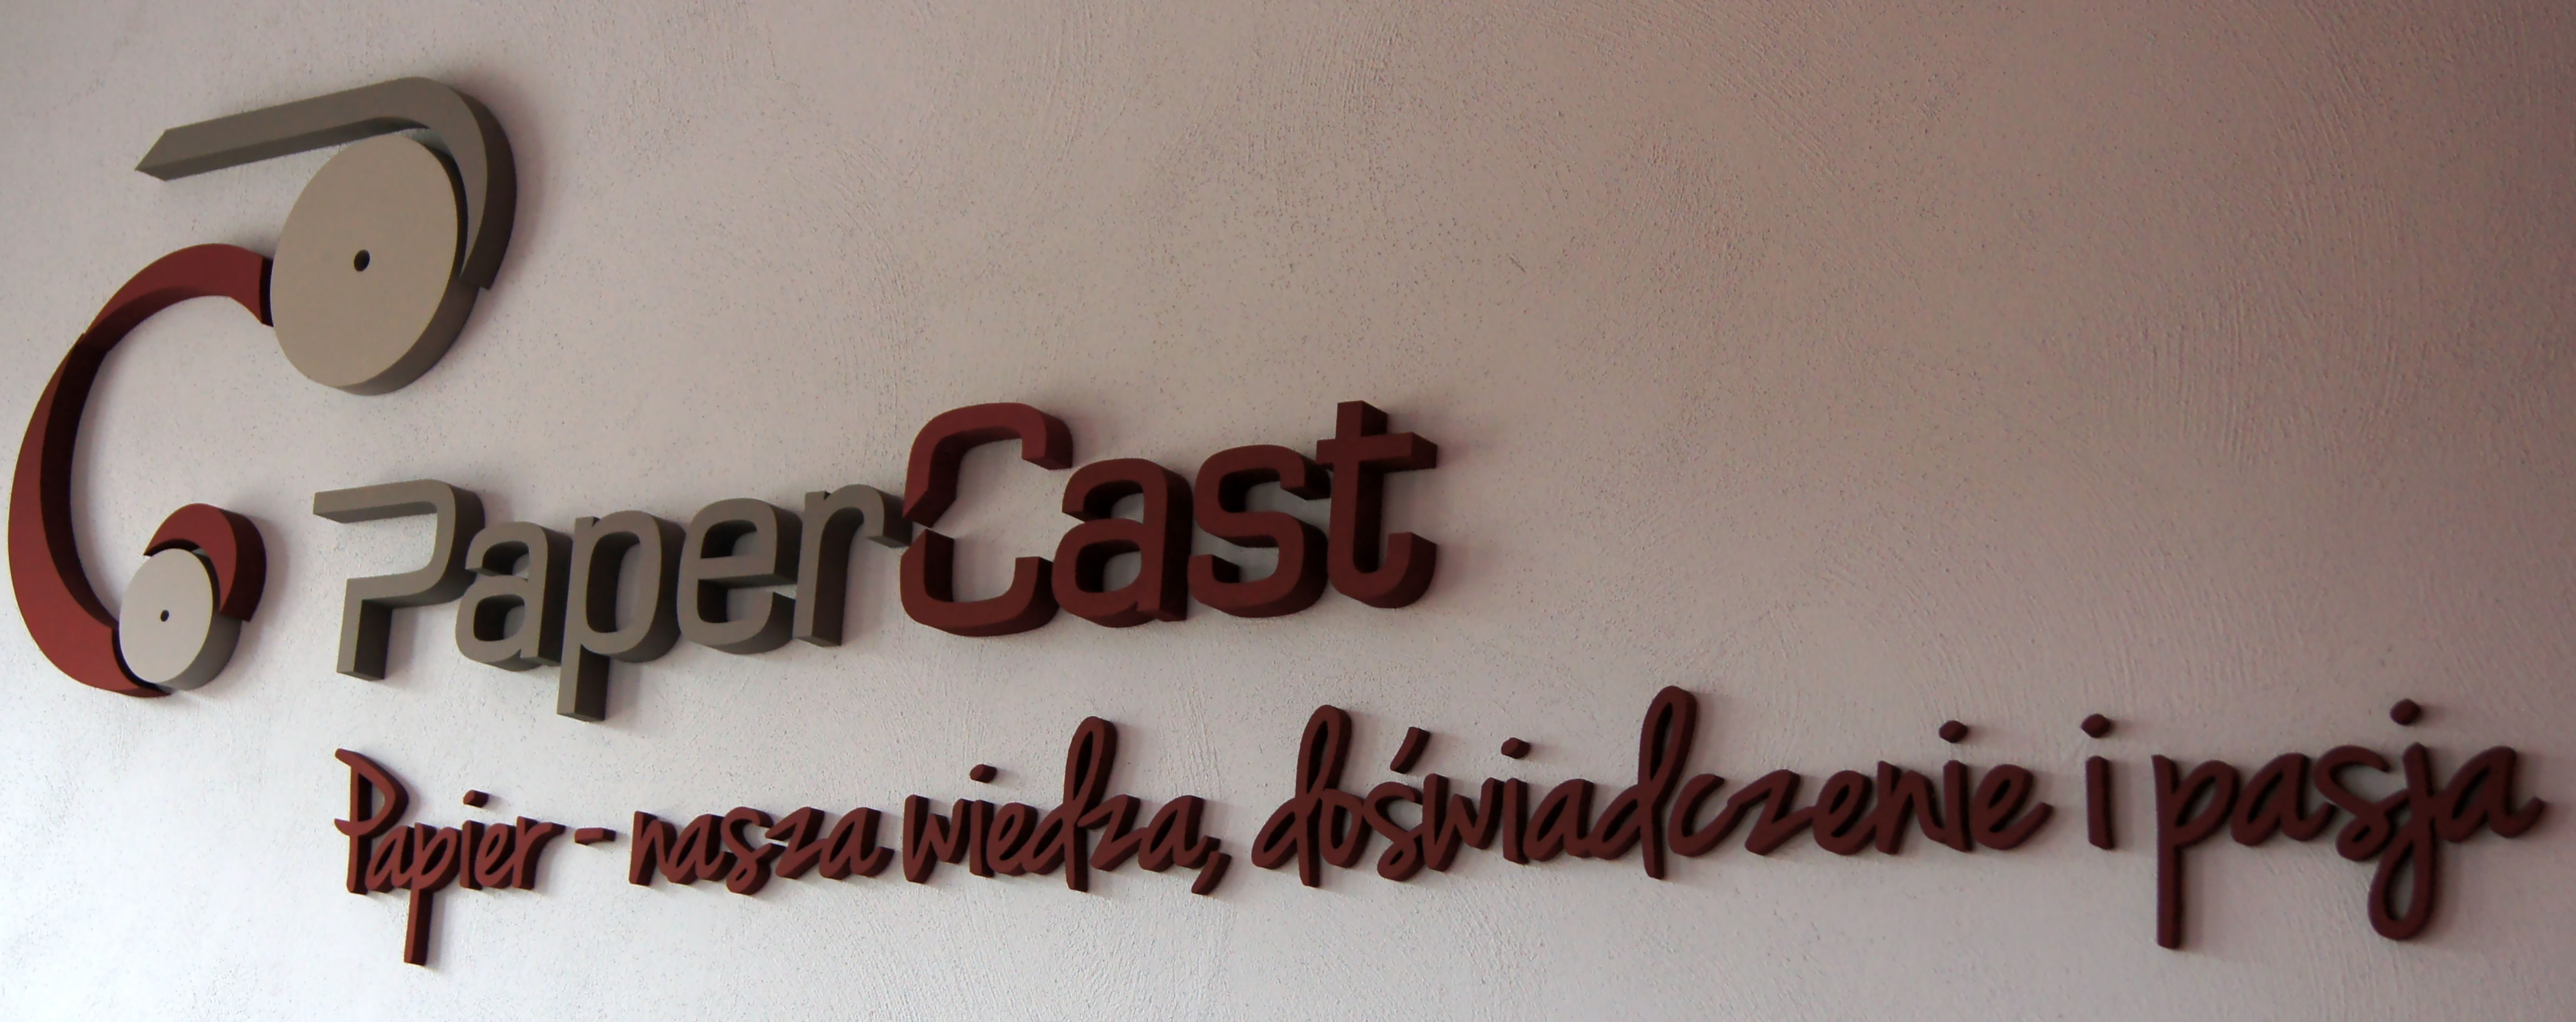 PaperCast